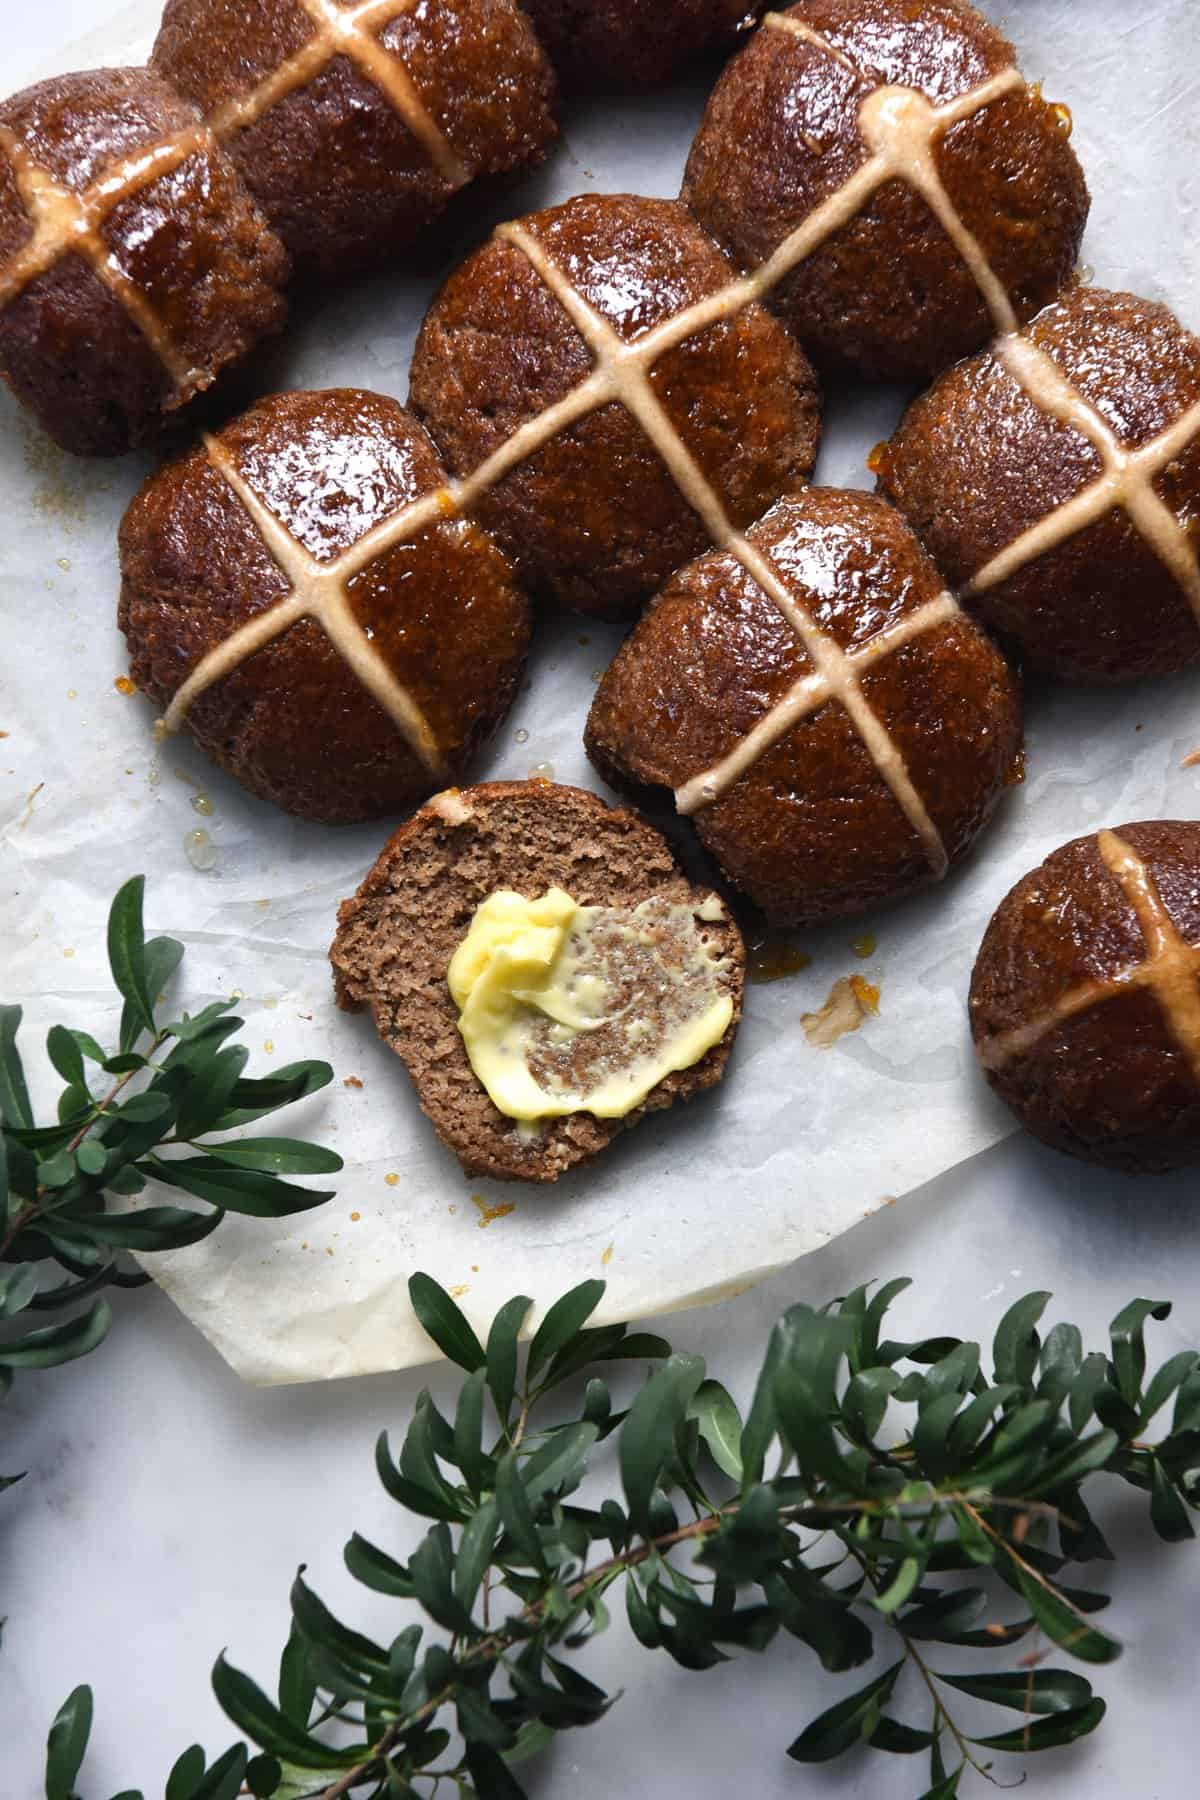 A close up of gluten free, vegan and FODMAP friendly hot cross buns surrounded by green floral leaves